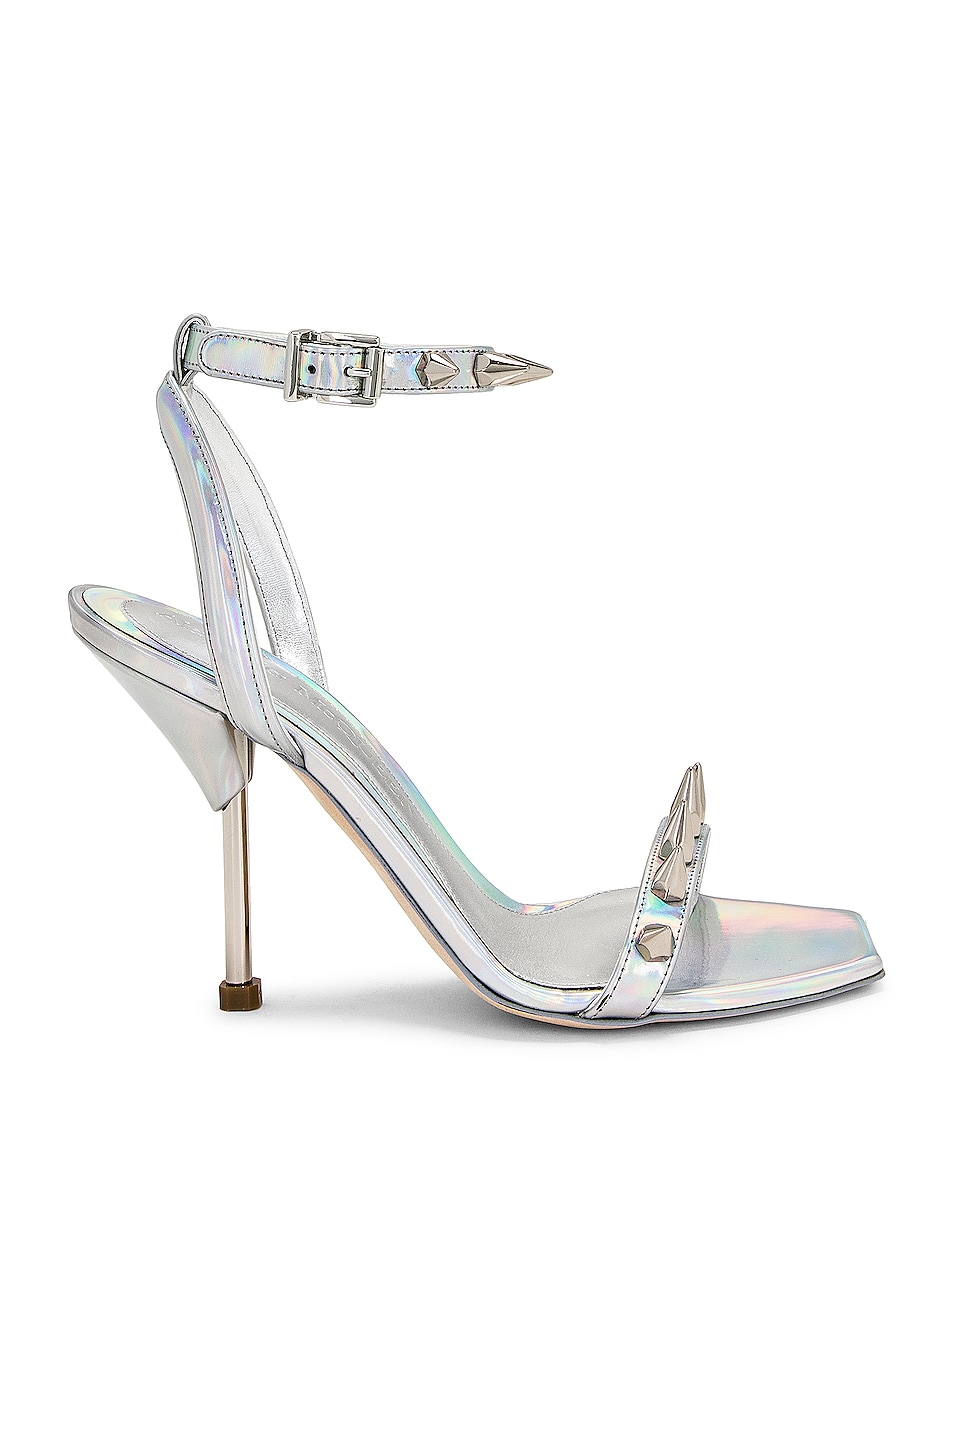 Image 1 of Alexander McQueen Spike High Heel Sandals in Silver Holographic & Silver